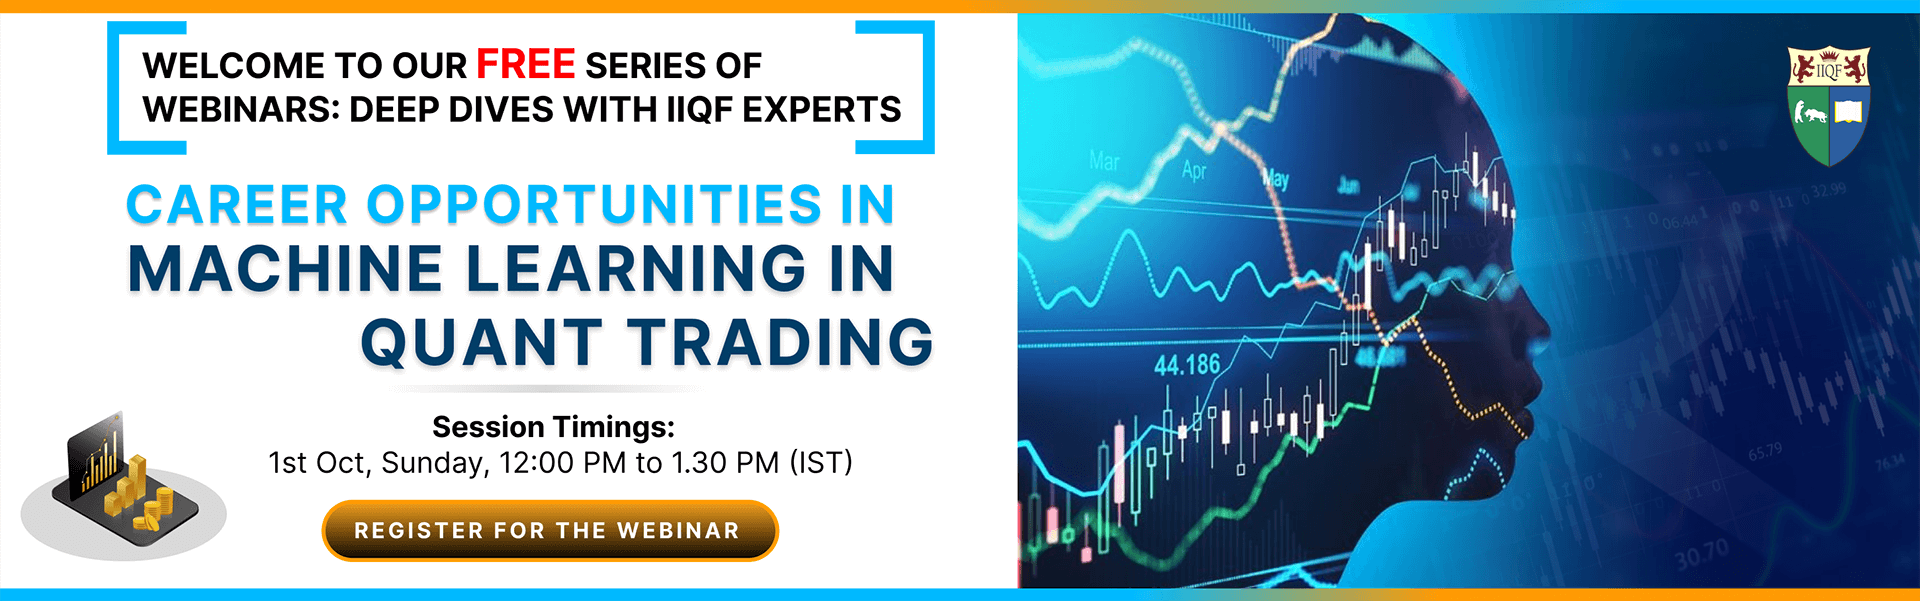 Career Opportunities in Machine Learning in Quant Trading - IIQF